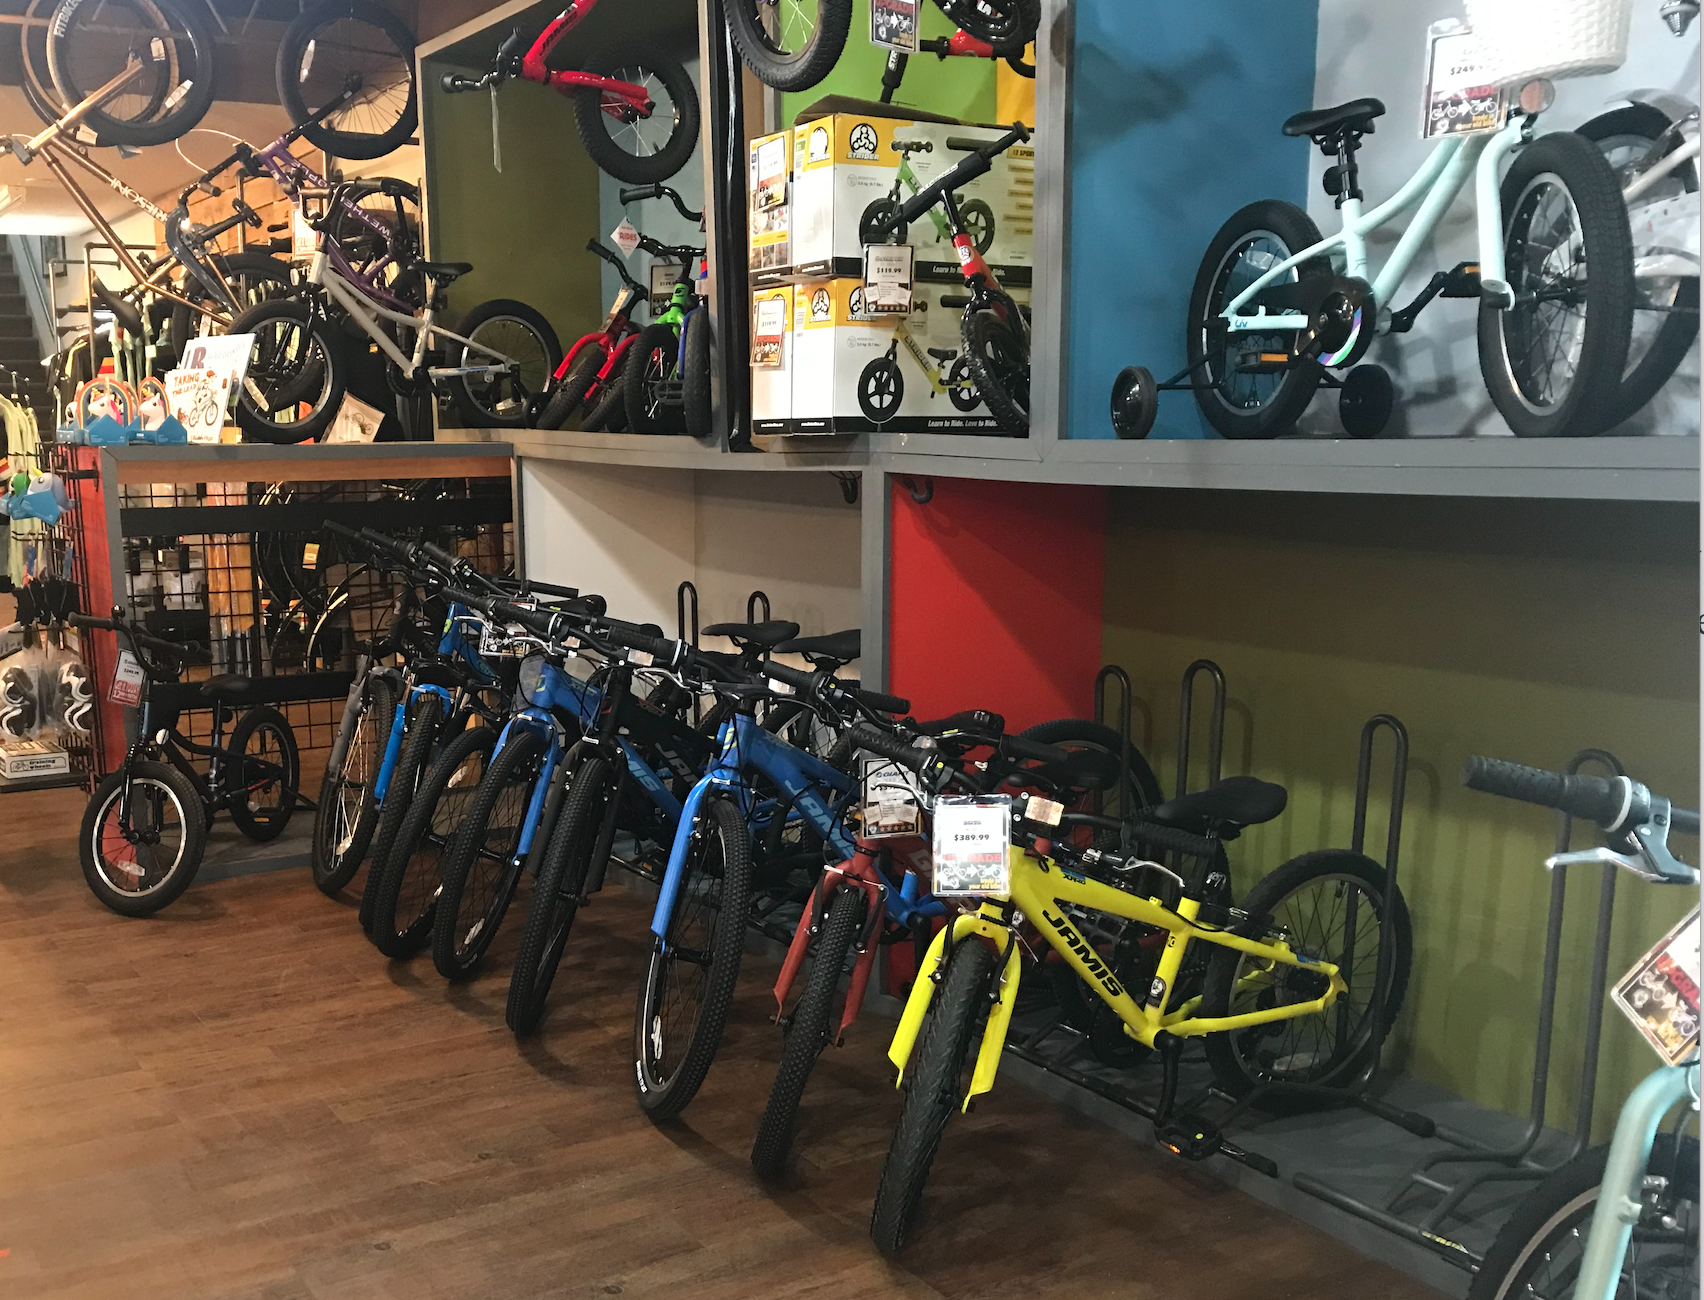 Bikes are in high demand and short supply